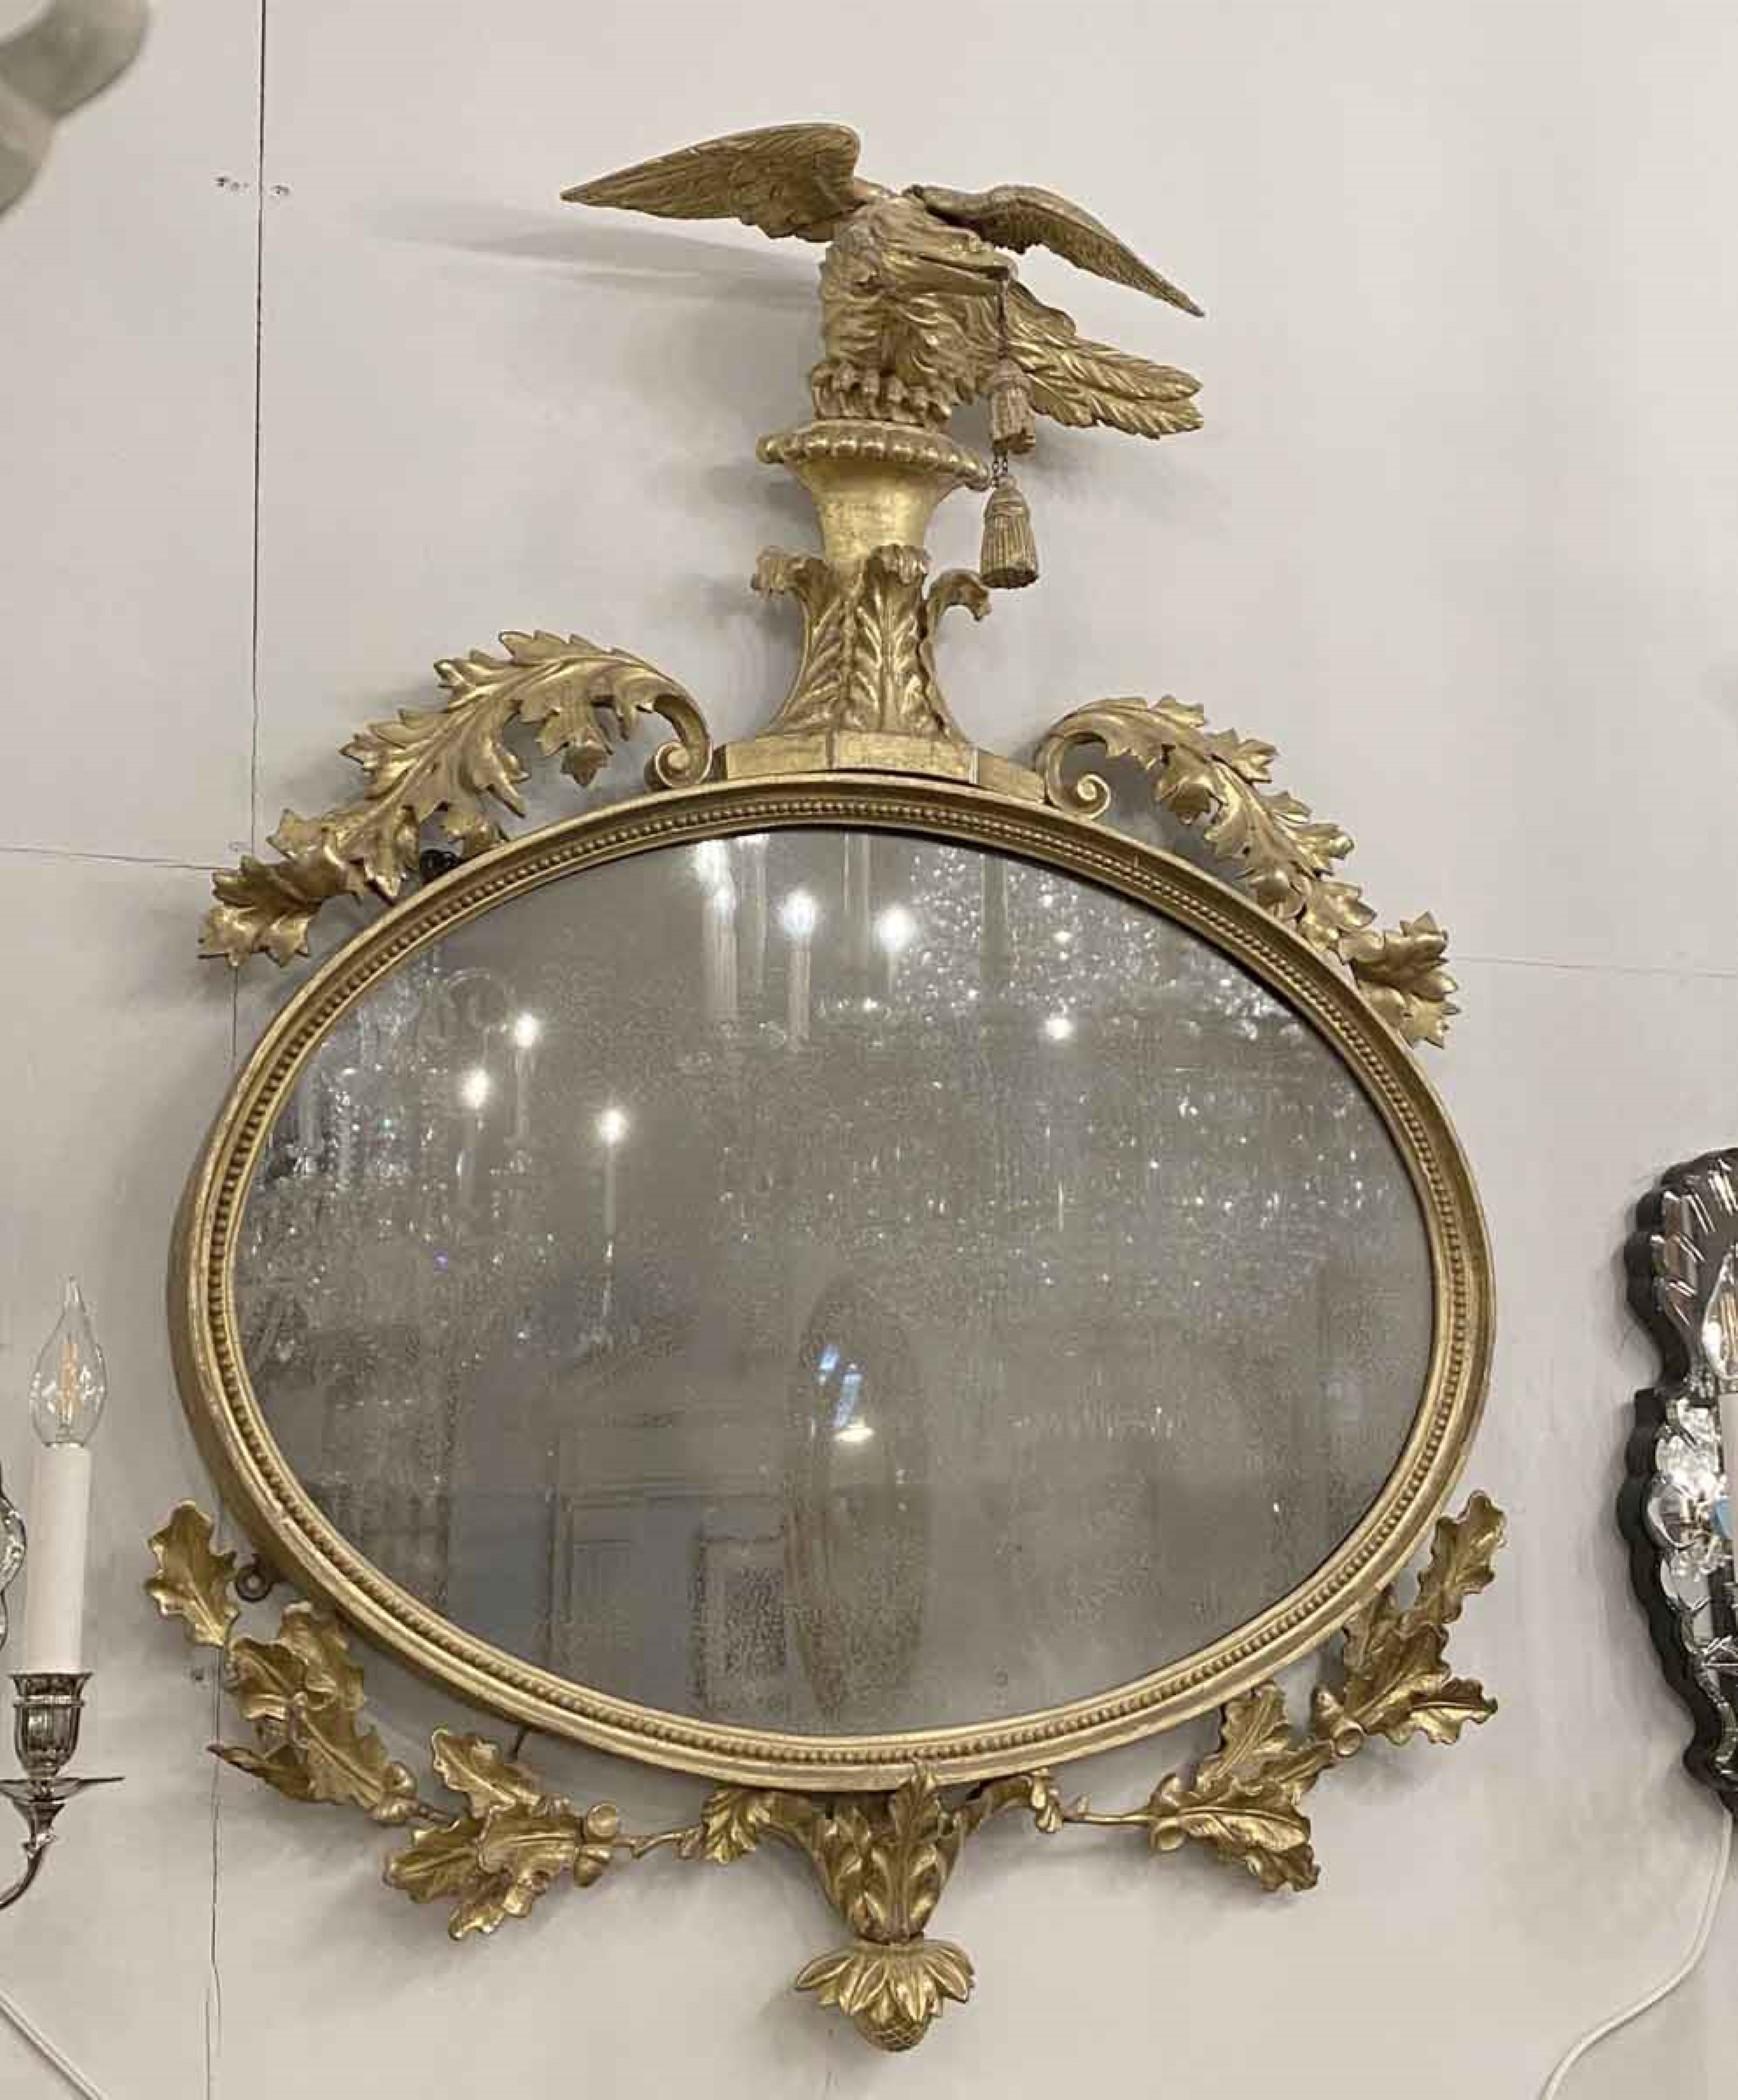 1920s hard carved gold gilt mirror with a carved wood eagle holding tassels with his beak. Original distressed mirror set into a beaded wood frame. Maple leaves and acorns completes the setting. Retrieved from a luxury apartment on East 61st St in